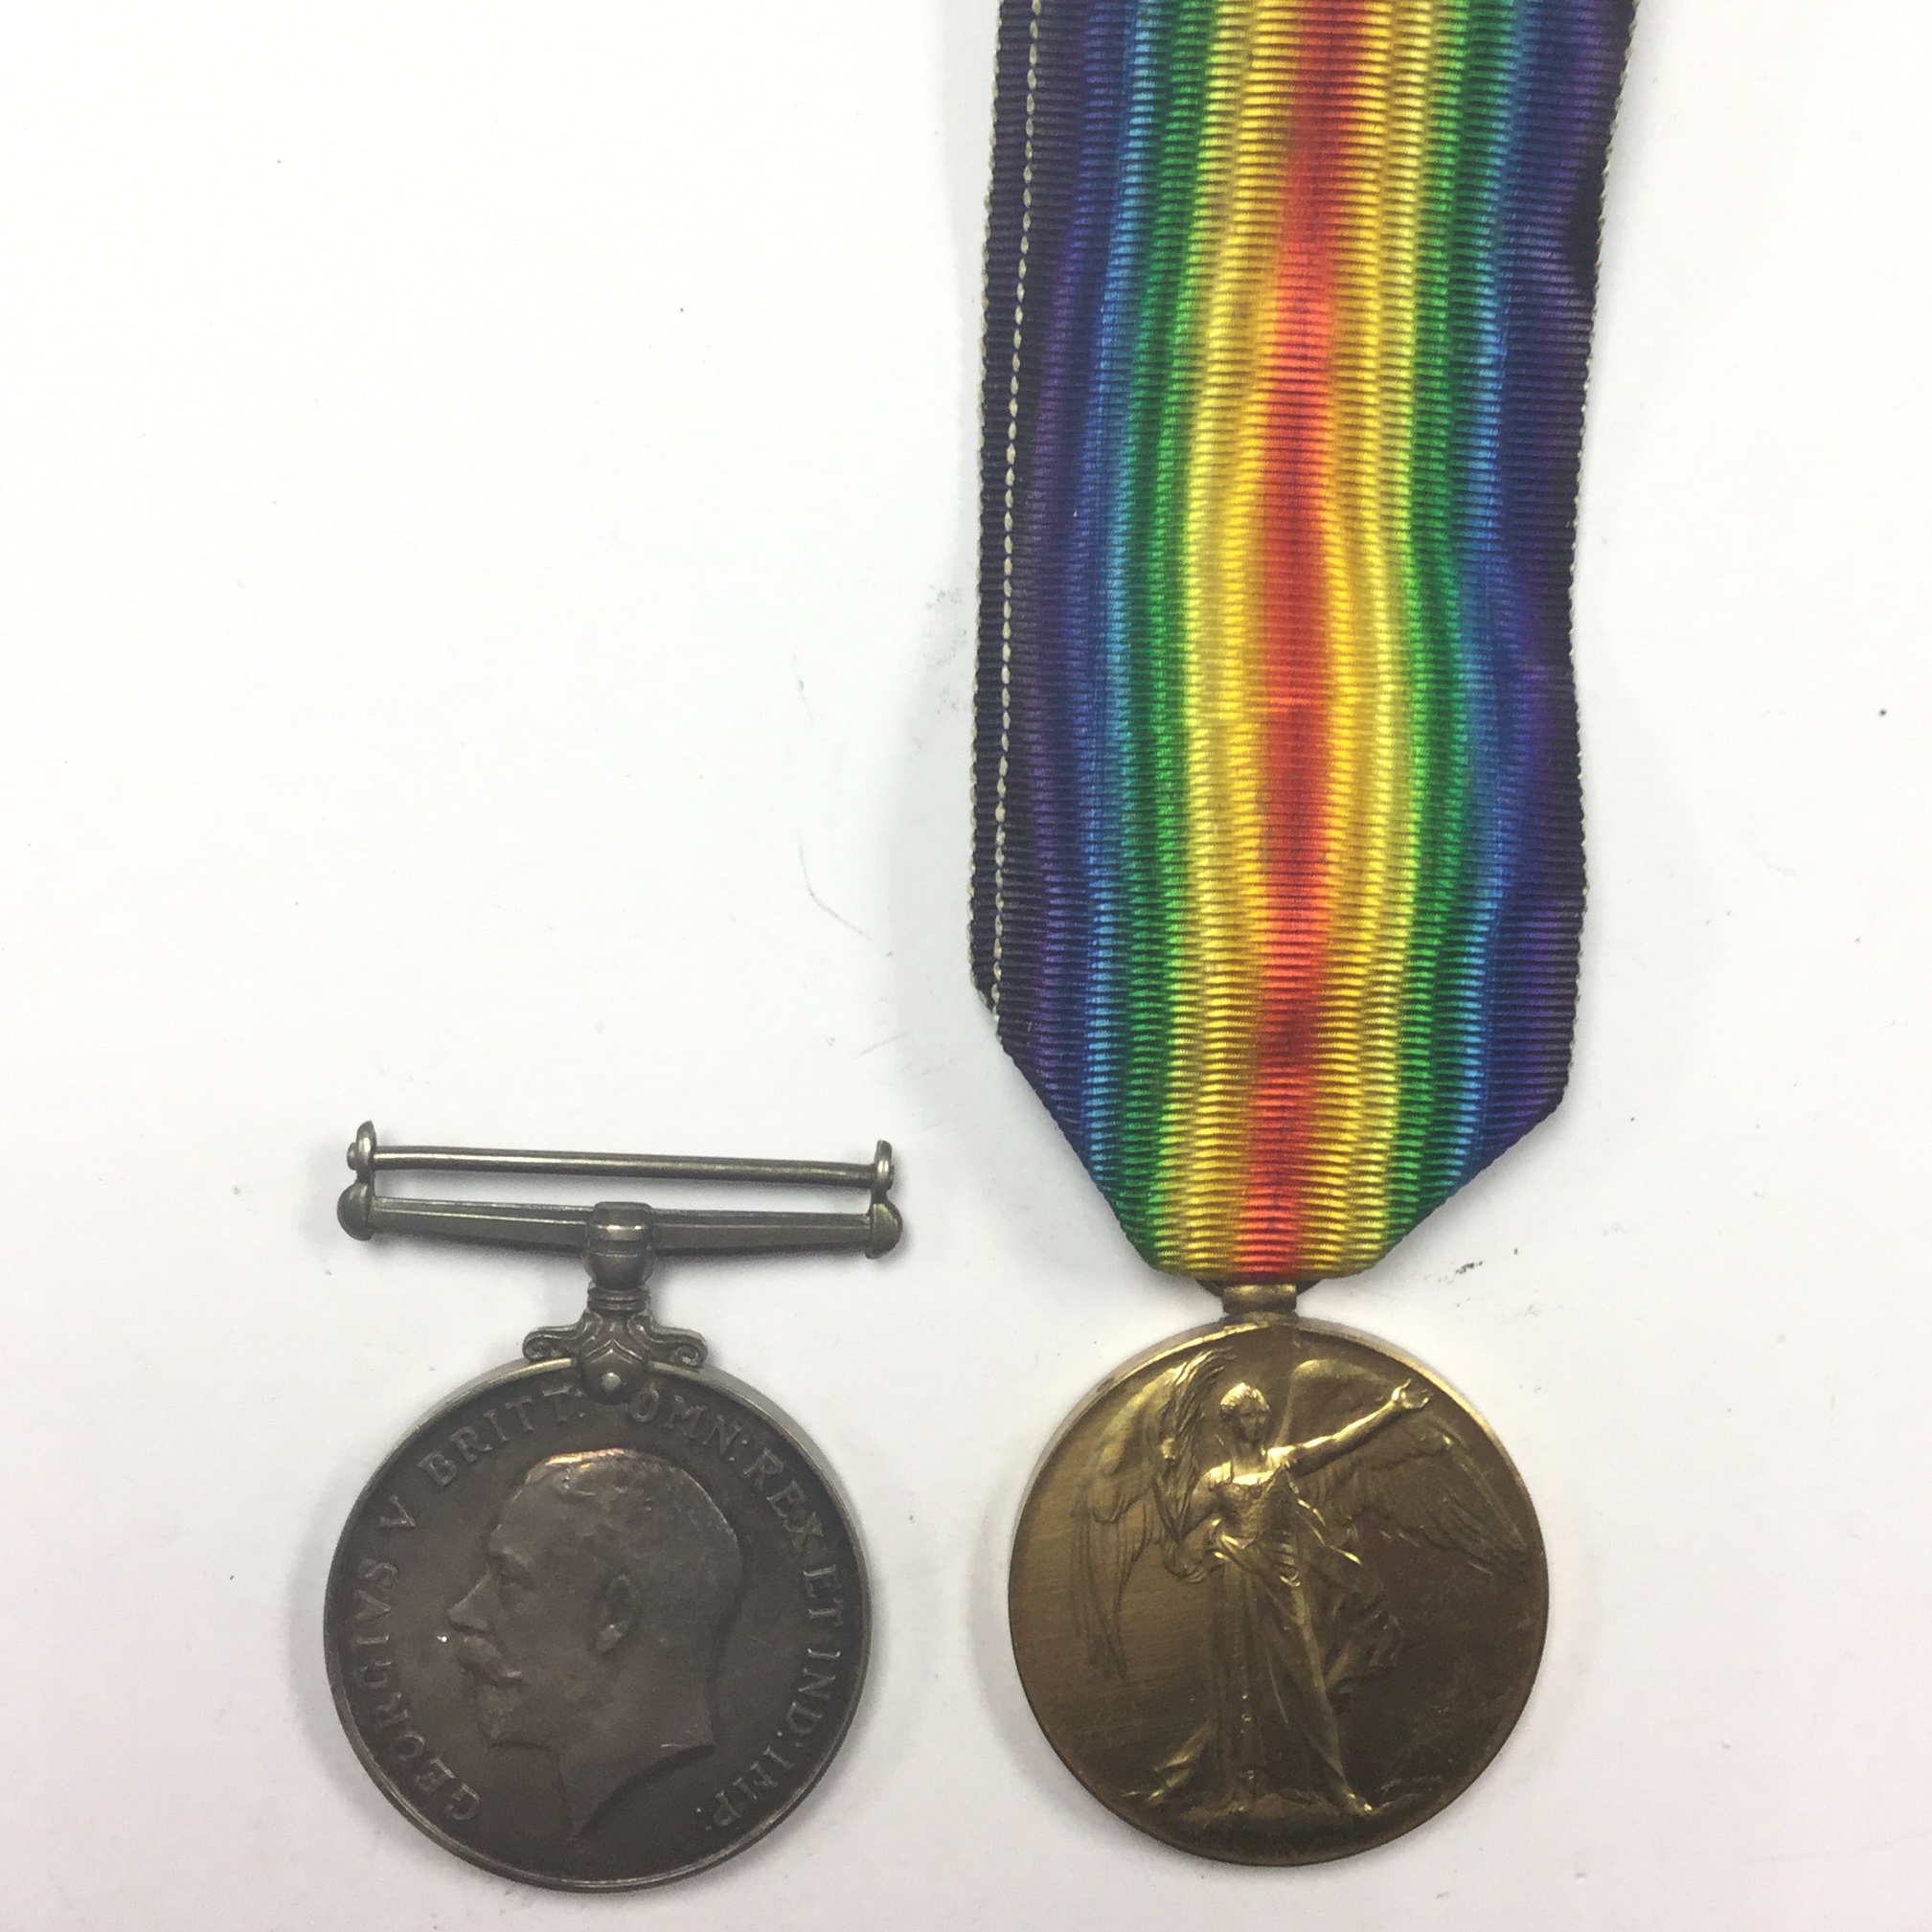 WW1 British War and Victory Medals to K-377 Pte S Kempsell, Royal Fusiliers.